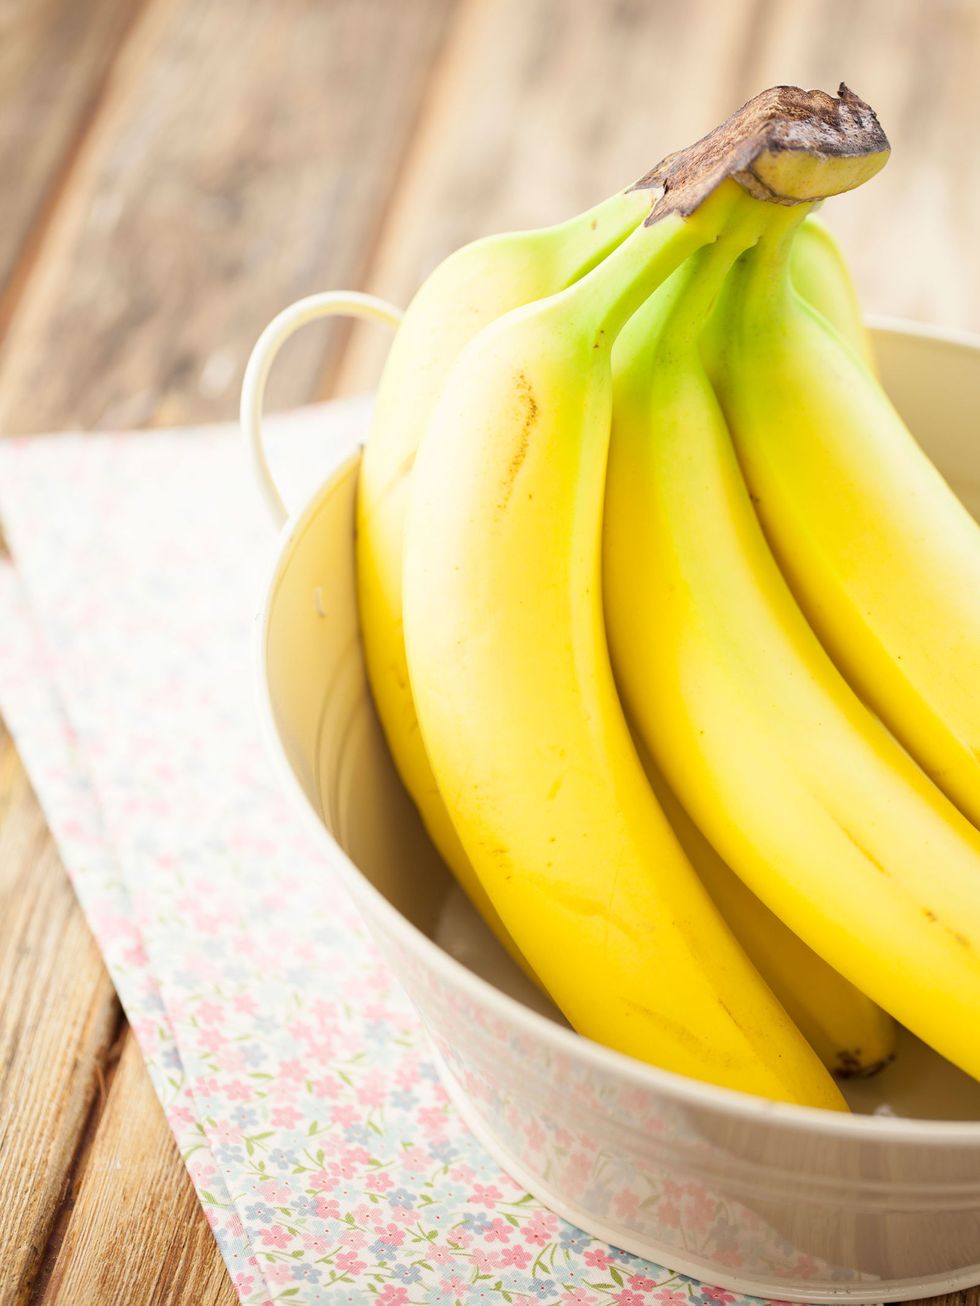 <p>This fruit has been given a bad rap, but without good reason. For one thing, a large banana provides nearly 500 mg potassium. &ldquo;Potassium helps your body regulate minerals and fluids in and out of your cells and may potentially increase basal metabolism, a measure of calories burned at rest while awake,&rdquo; says Newgent. &ldquo;Bananas also contain resistant starch, which functions like fiber since your body can&rsquo;t digest it, and has metabolic benefits, including reducing blood sugar levels after meals.&rdquo; Keep in mind that the greener the banana, the more resistant starch it contains. Also, <a href="http://www.aromapatch.com/Hirsch_Weight_Loss_Smell.pdf">research</a> shows that sniffing a banana can actually suppress your appetite, so you may want to breathe in its scent before enjoying it.</p>